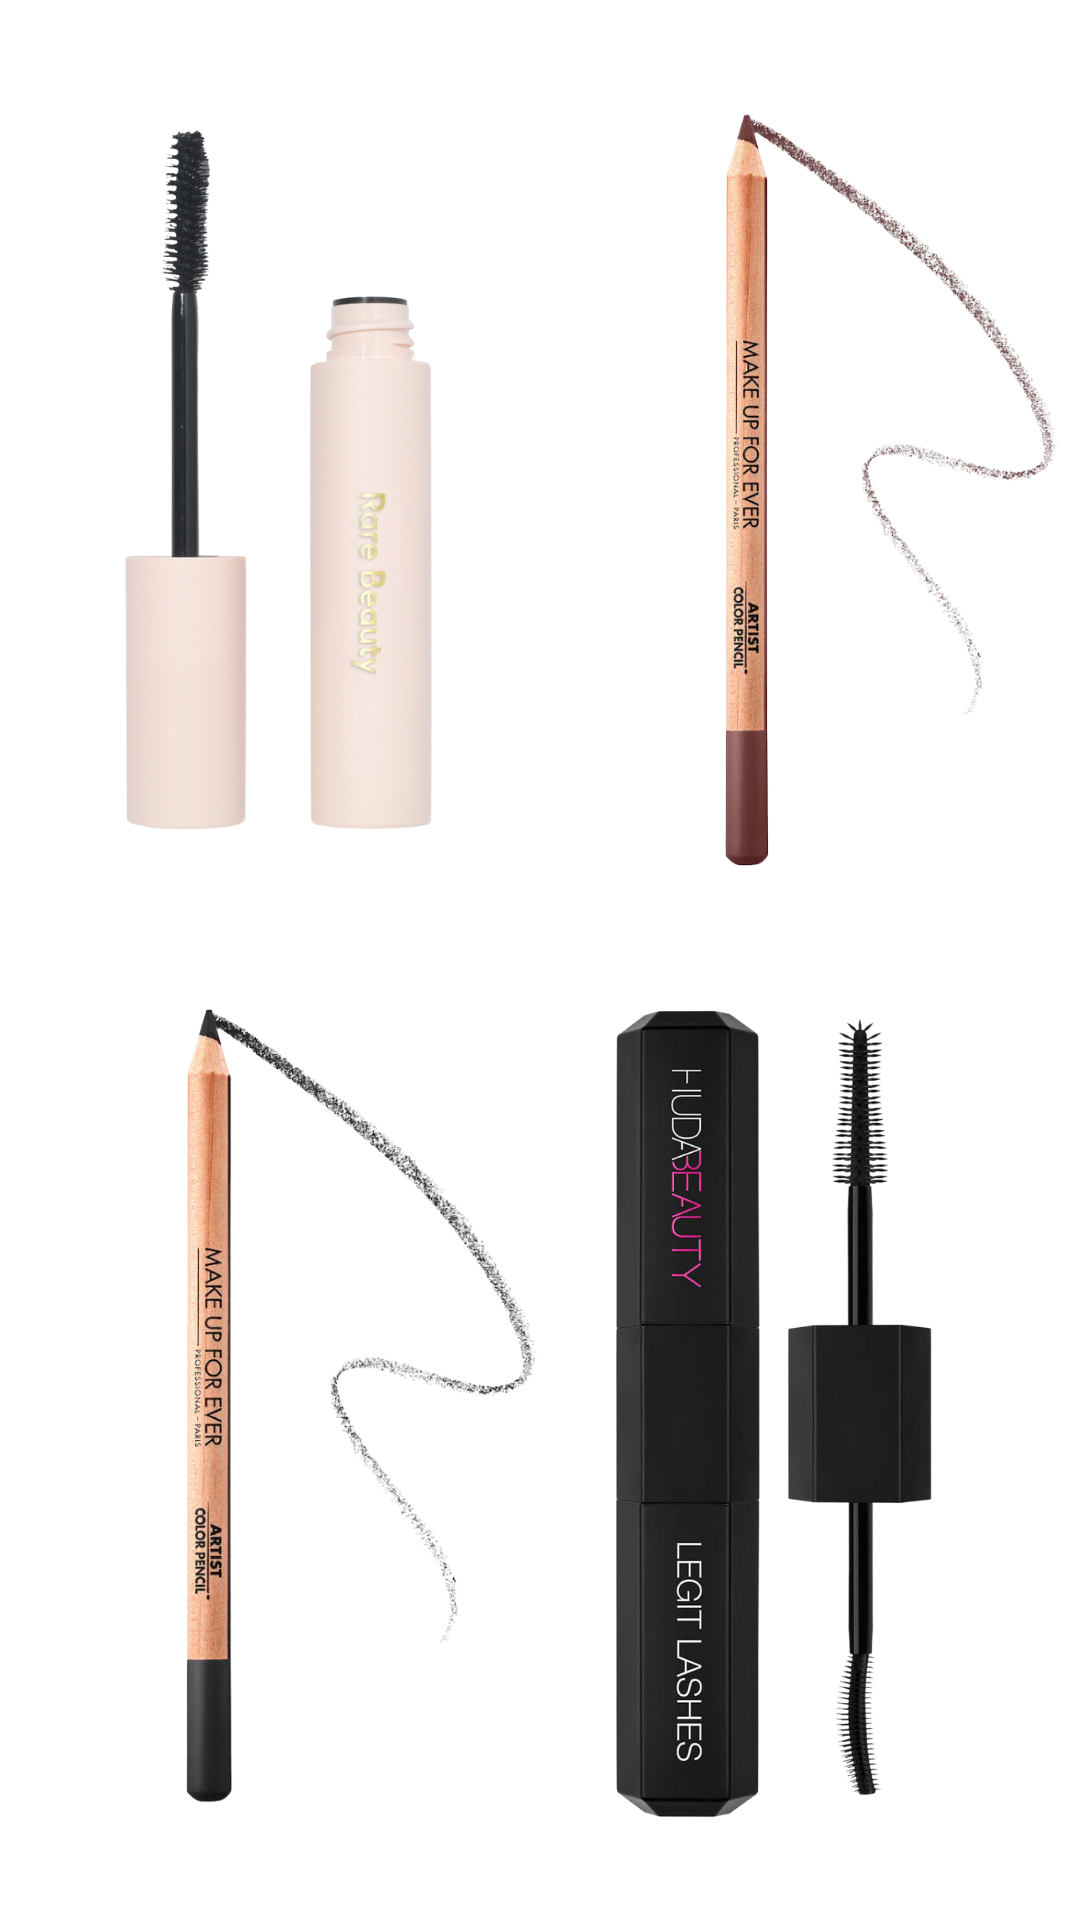 Mascara by Rare Beauty, and Huda Beauty and eyeliners by Makeup Forever